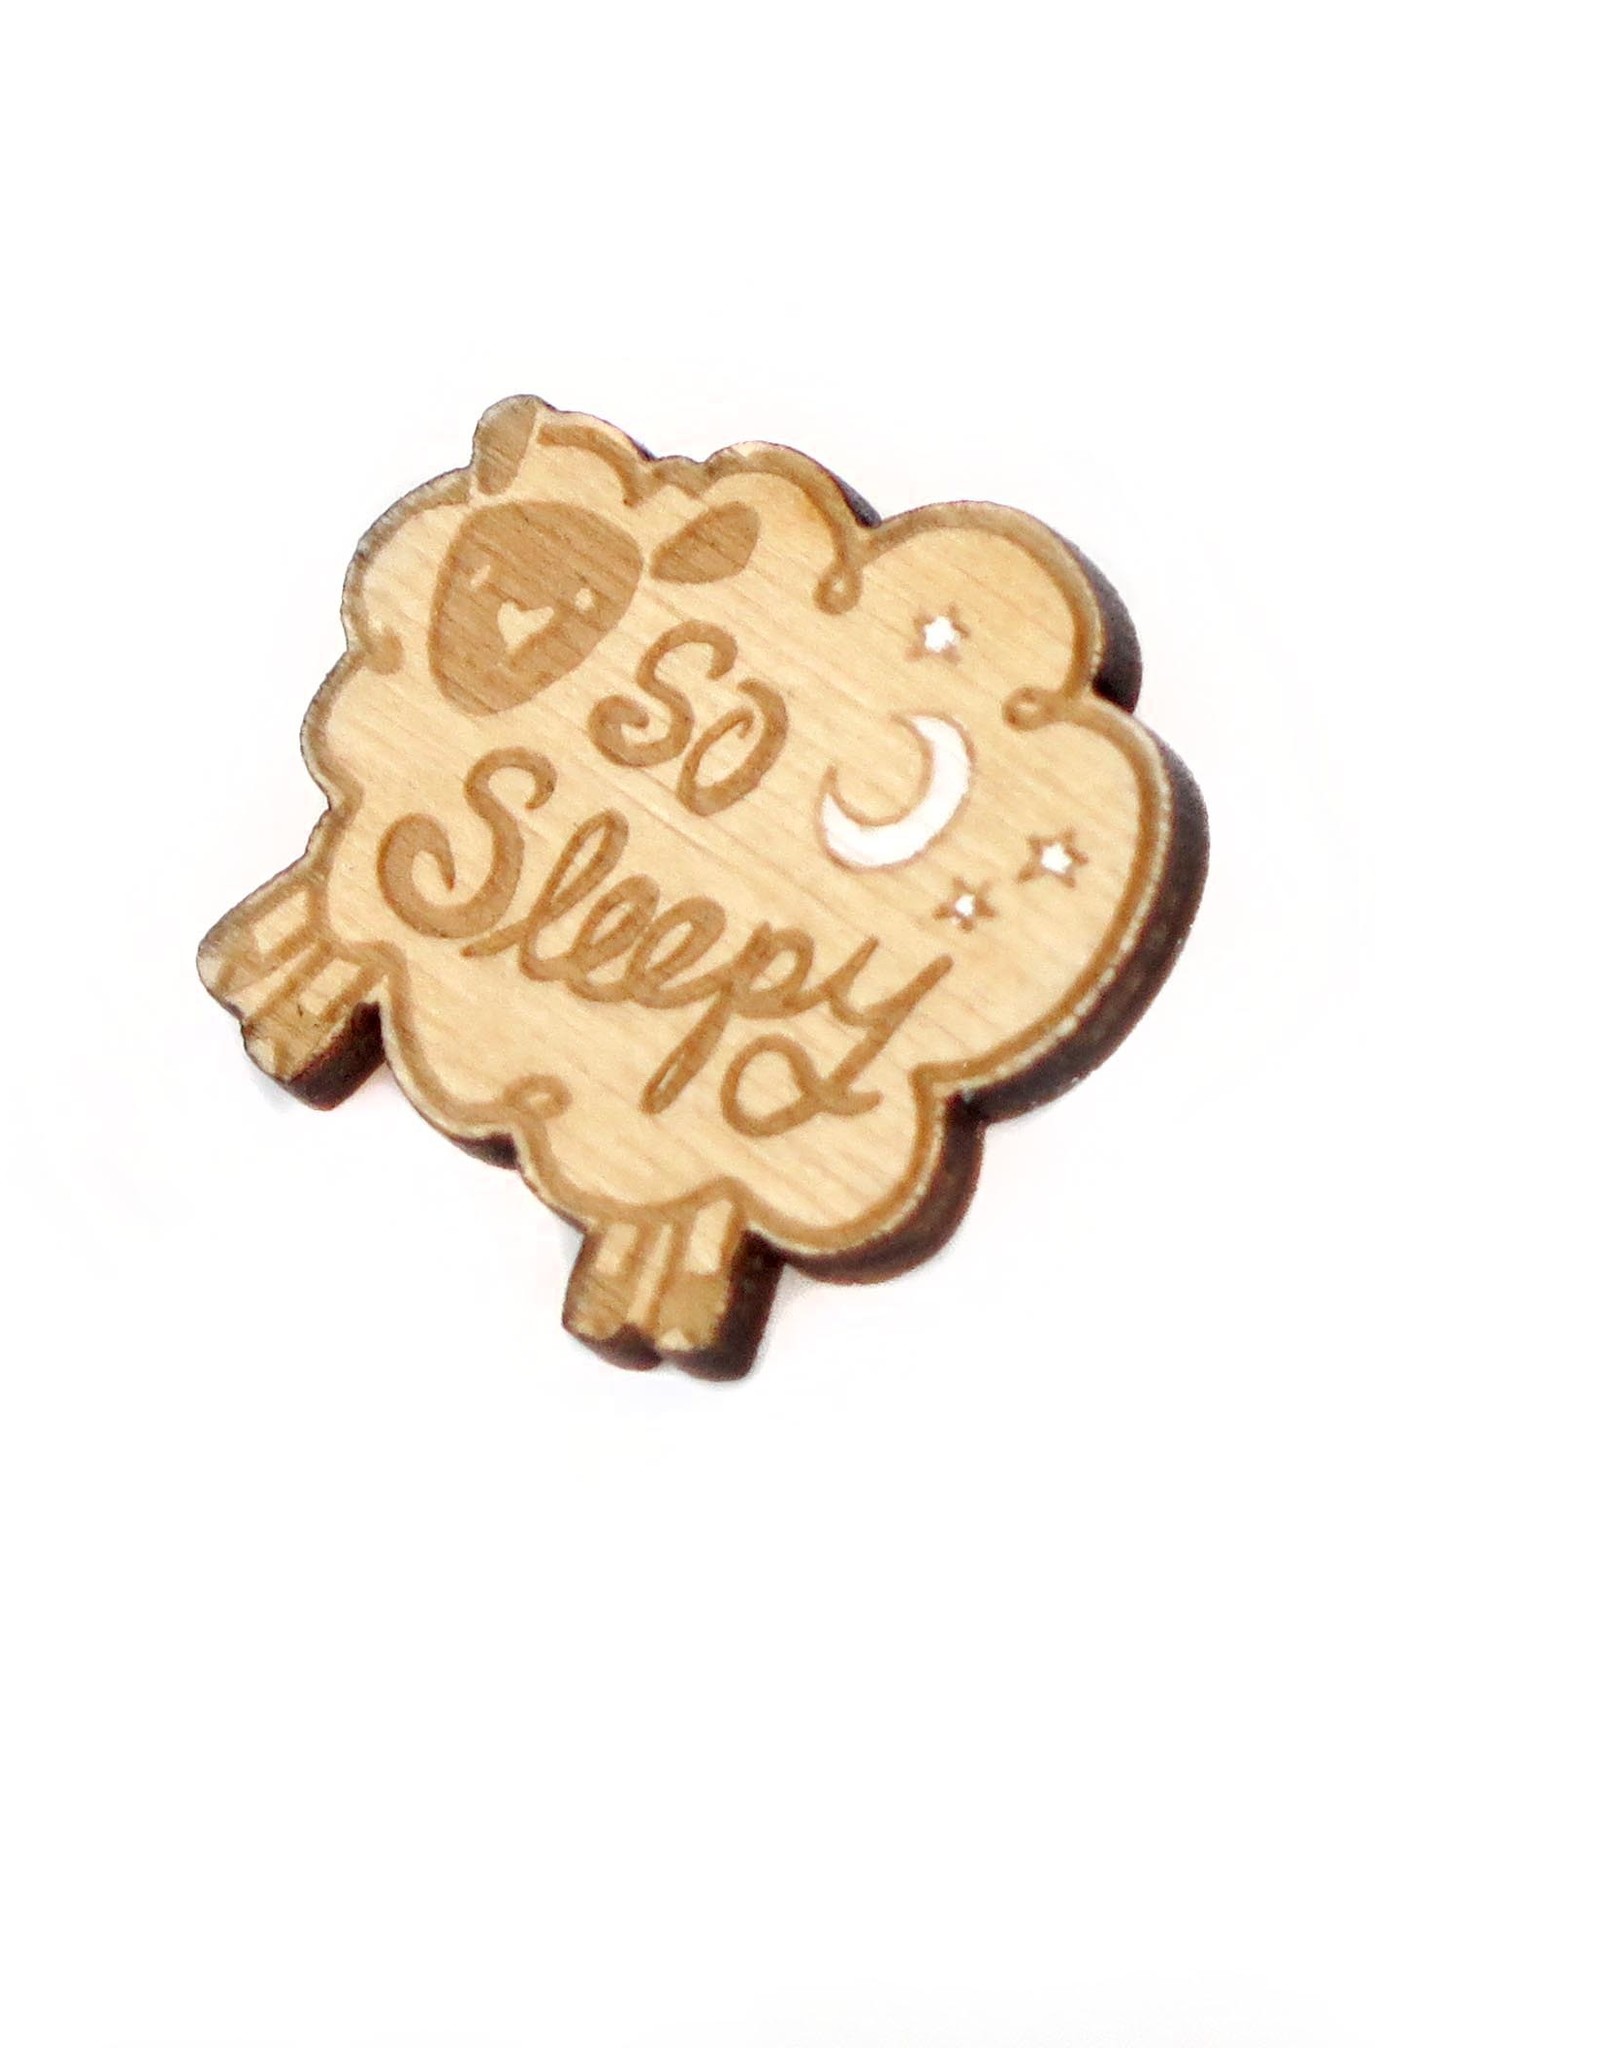 Sophie Quillec "So Sleepy" pin by Sophie Quillec